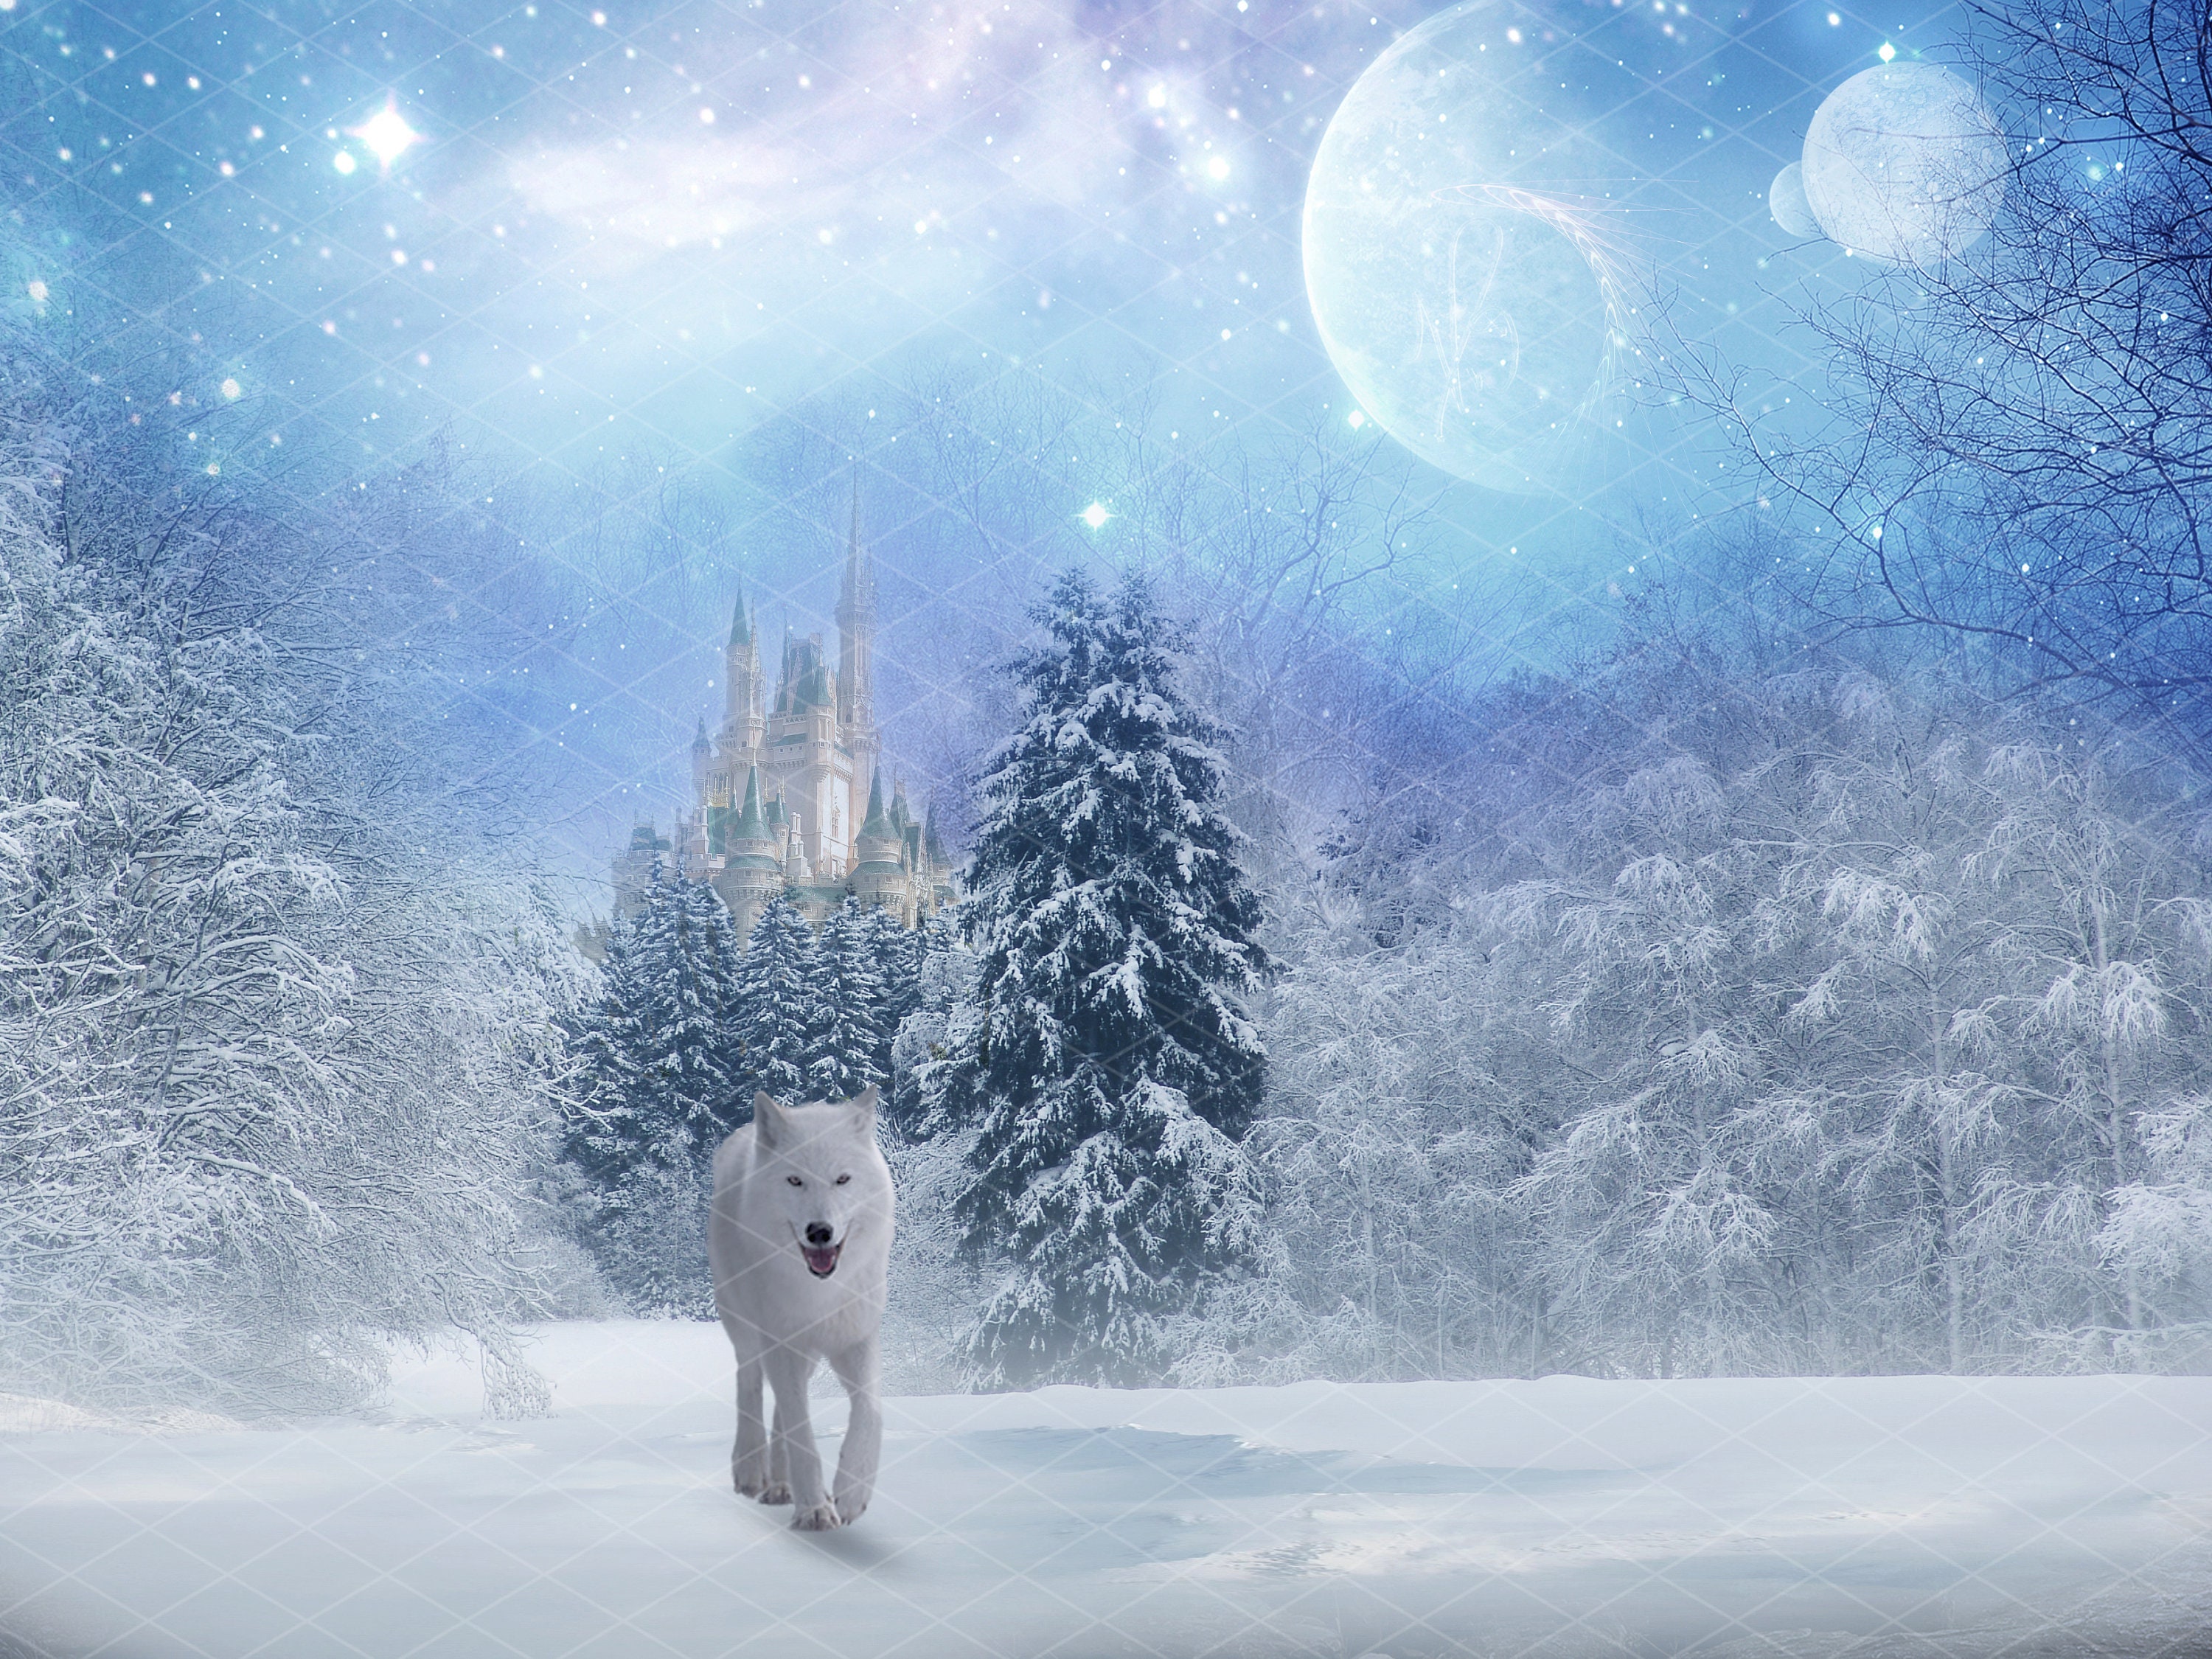 Fantasy Magical Winter Landscape With Castle & White Wolf